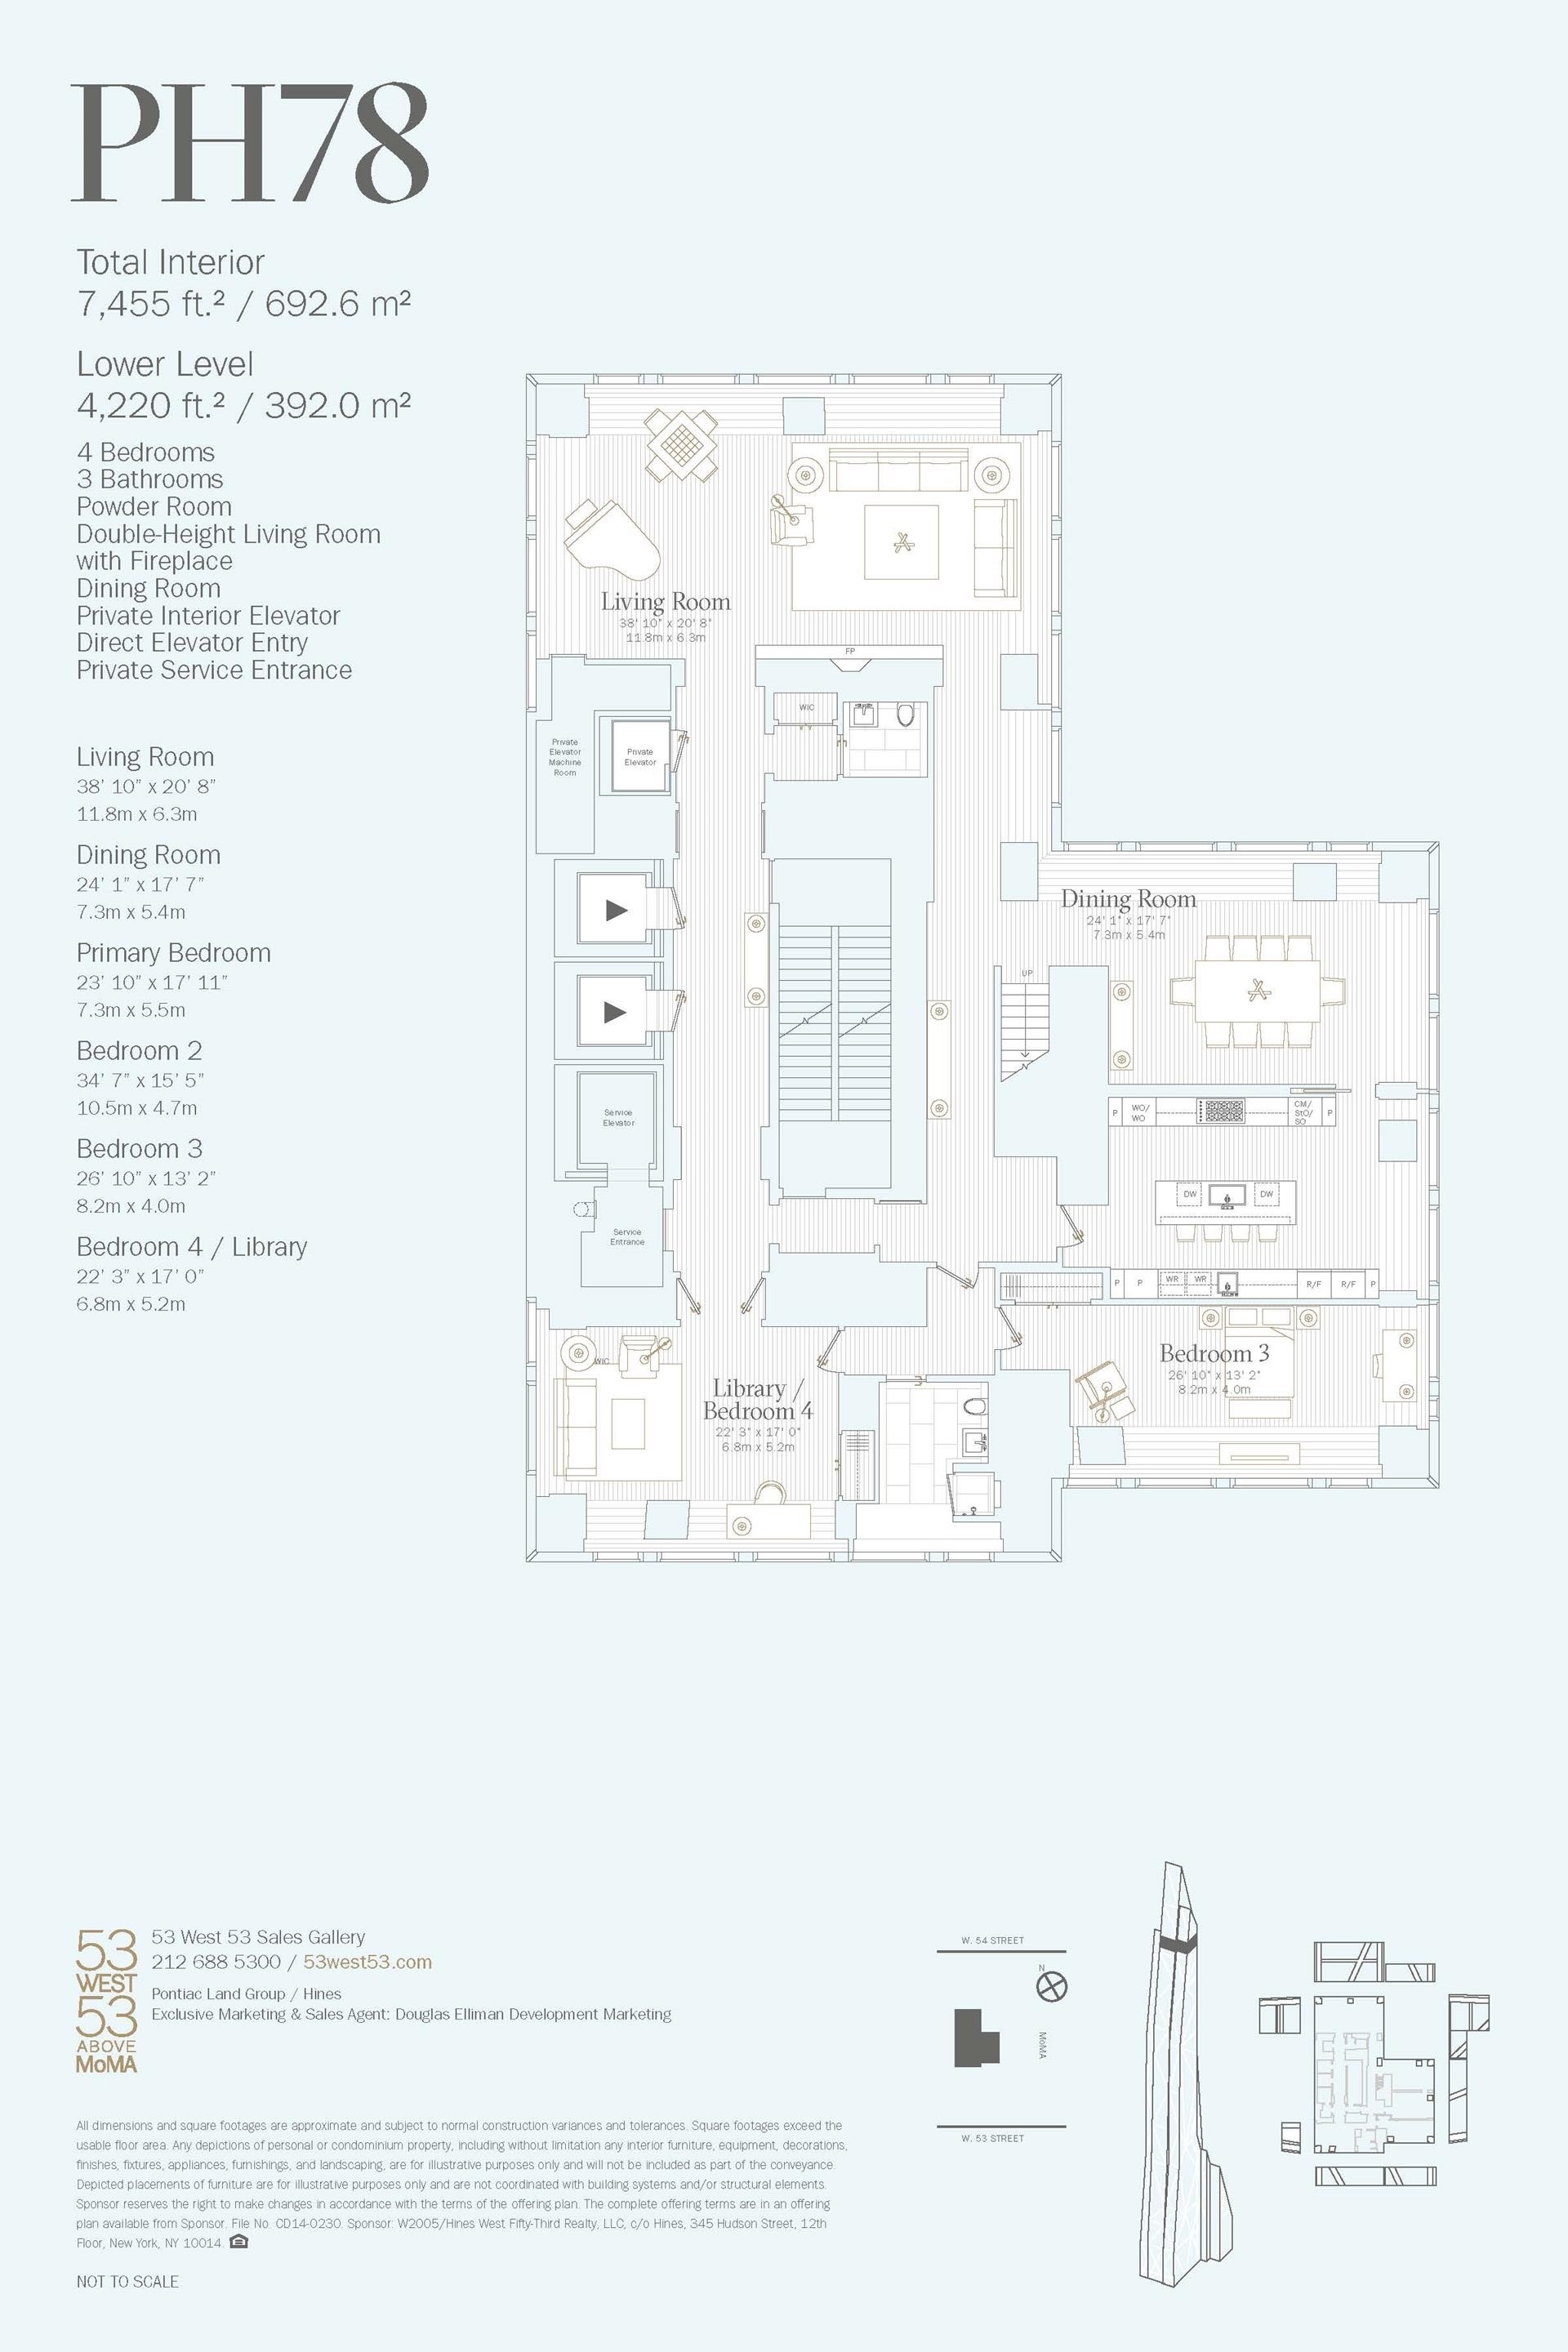 2. Condominiums for Sale at 53W53, 53 53RD ST W, PH78 Midtown West, New York, NY 10019